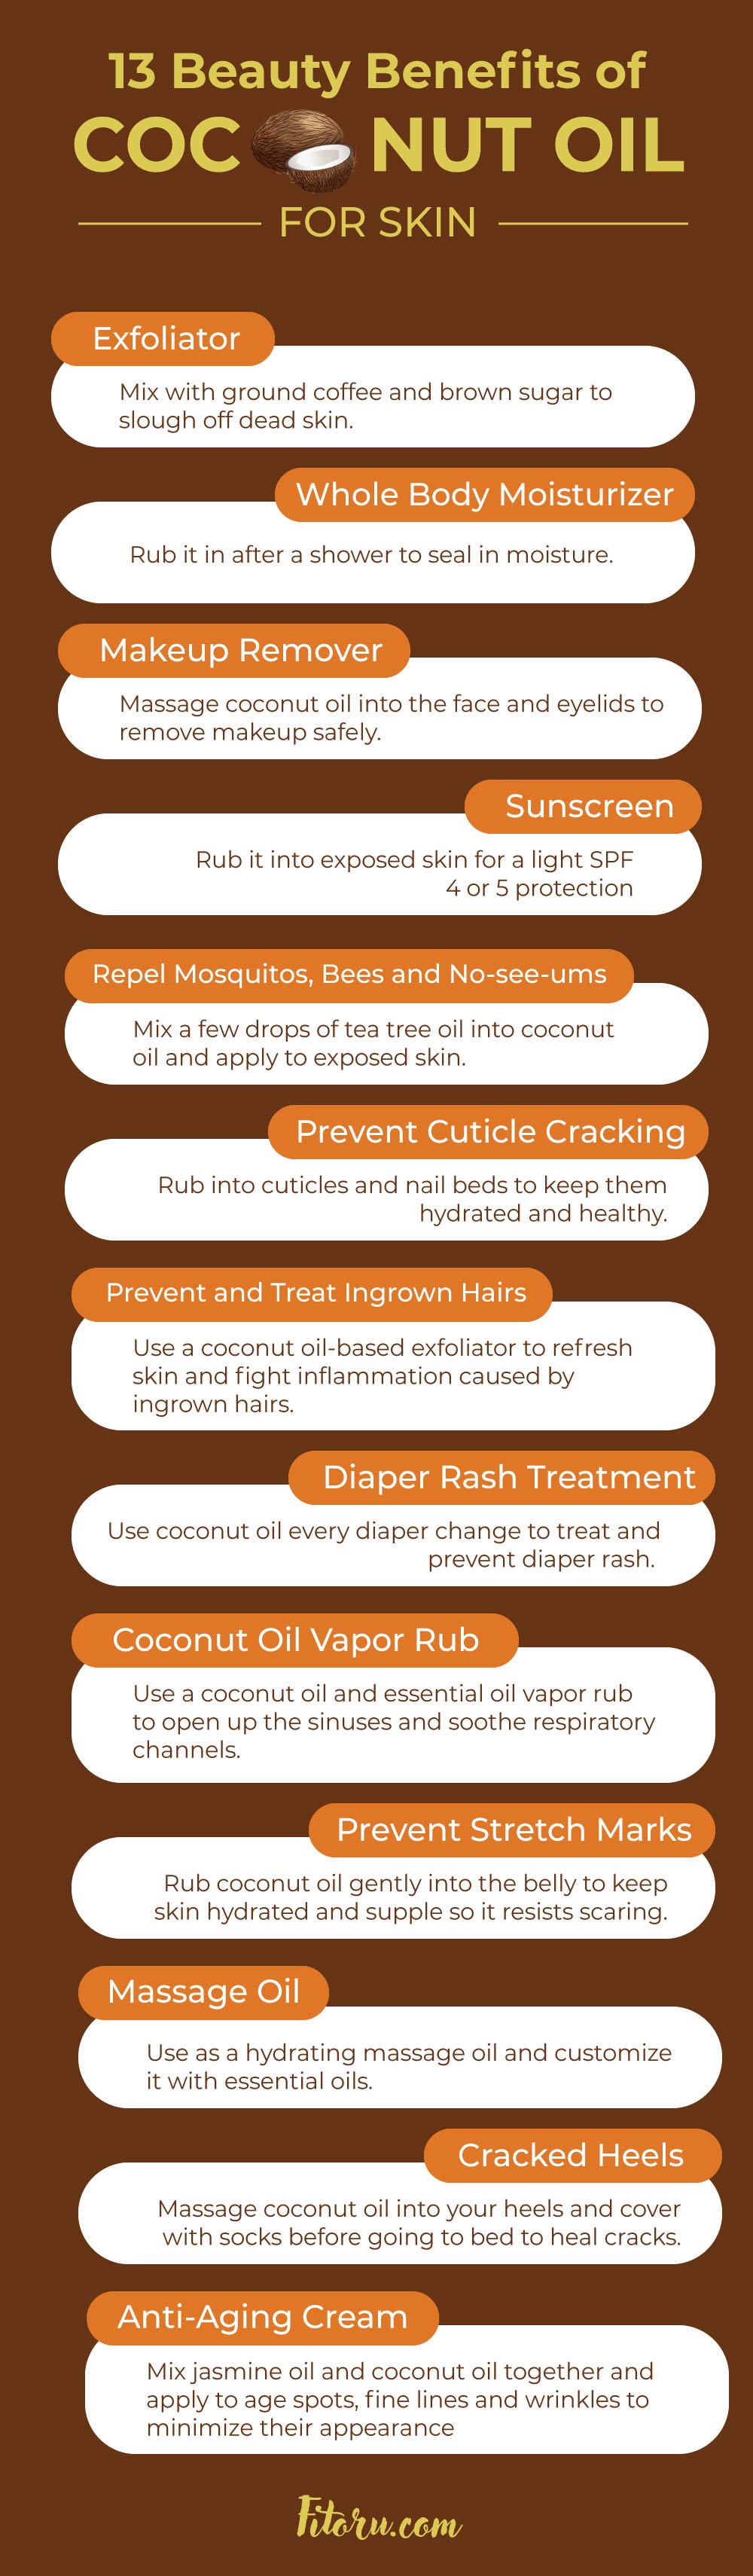 13 Beauty Benefits of Coconut Oil for Skin